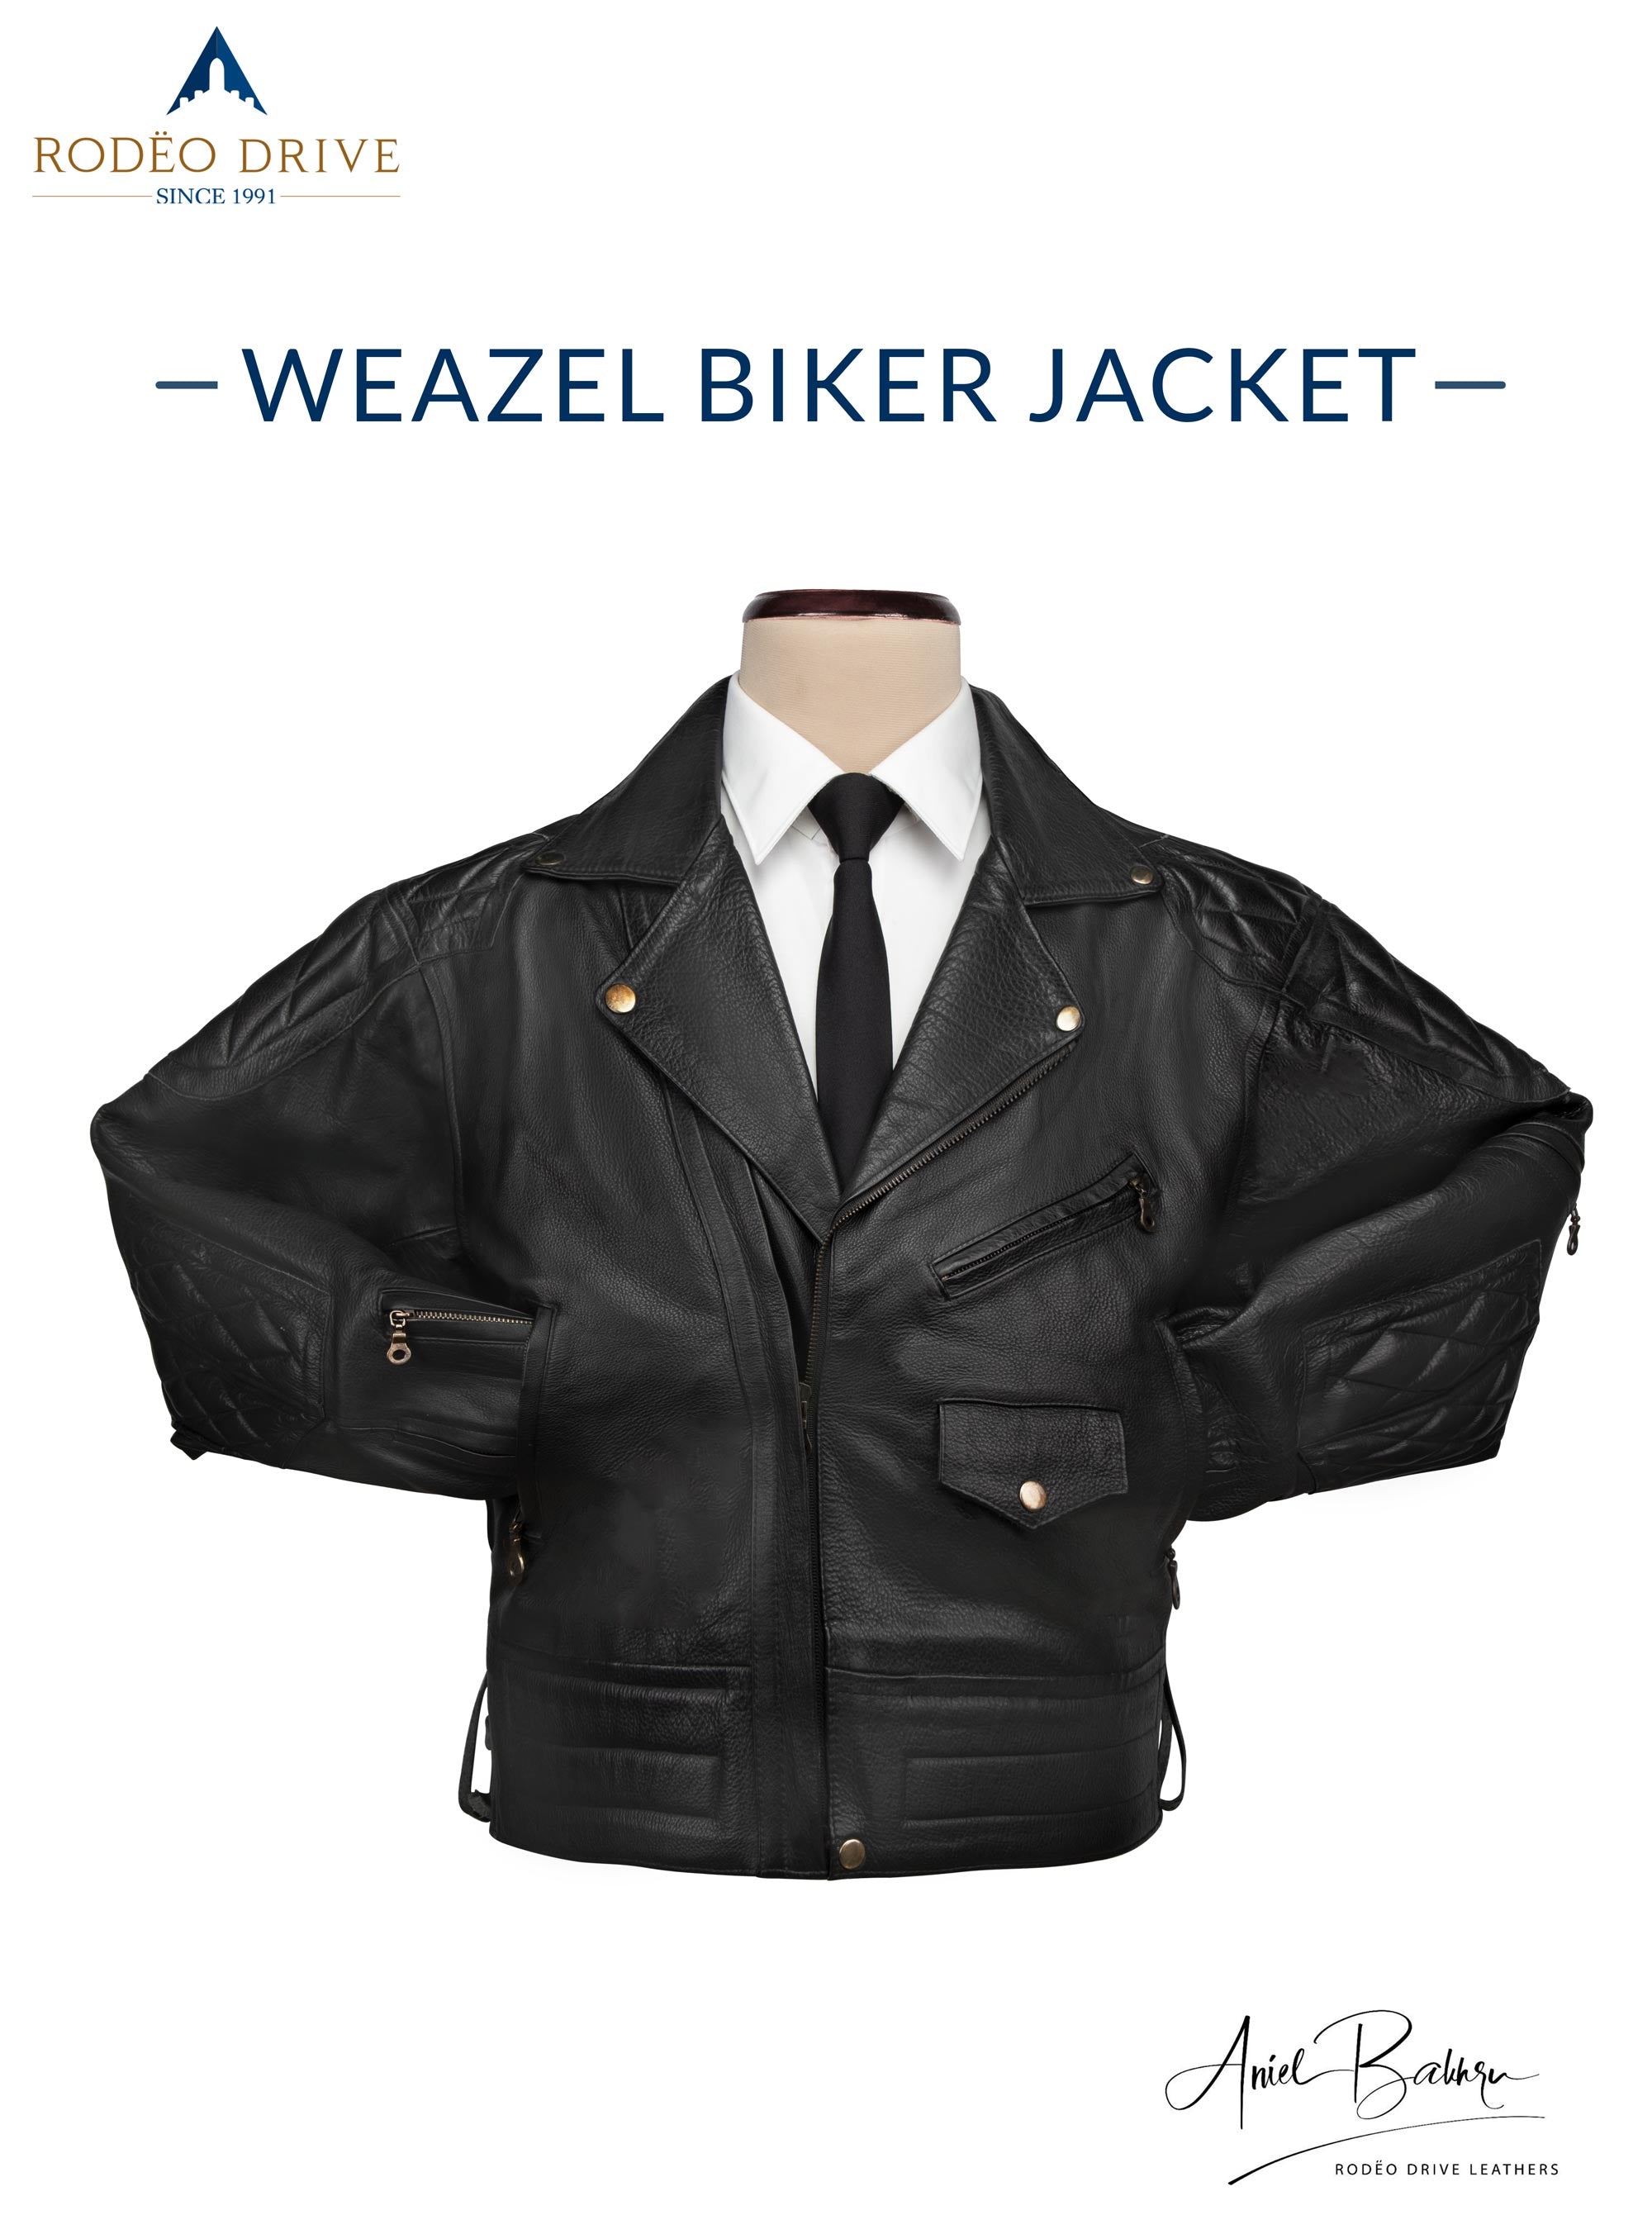 Front image of black WEAZEL BIKER JACKET.. It is displayed on mannequin. a white shirt is tucked in with a black neck tie. Both its hand are tucked inside slit pockets. It is half zipped